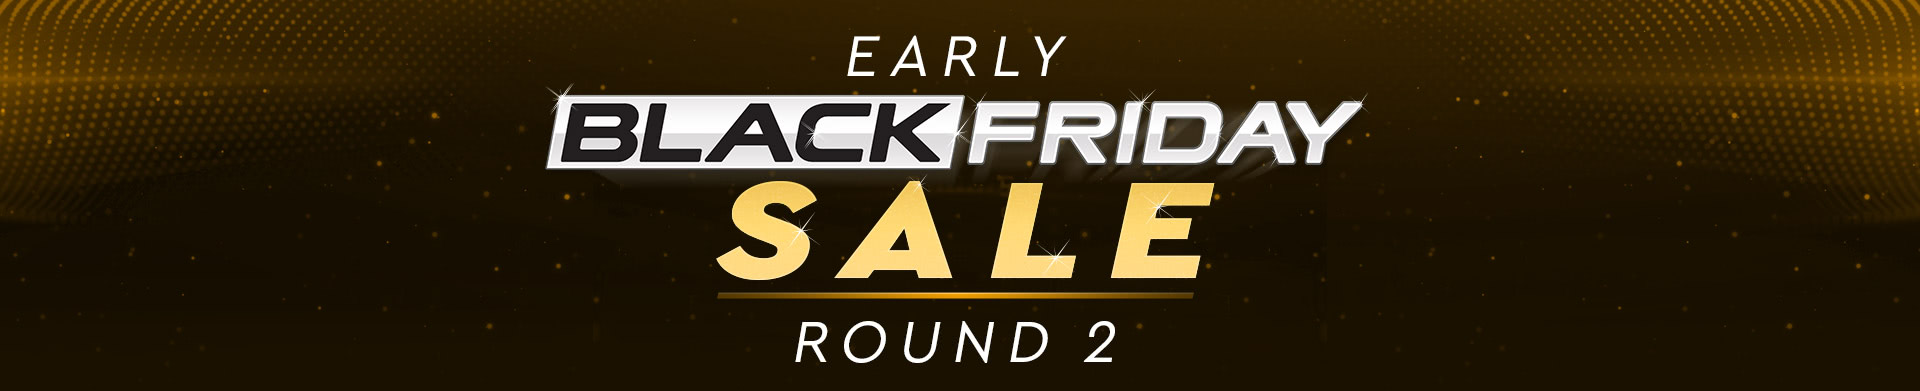 Early Black Friday Sale - Round 2